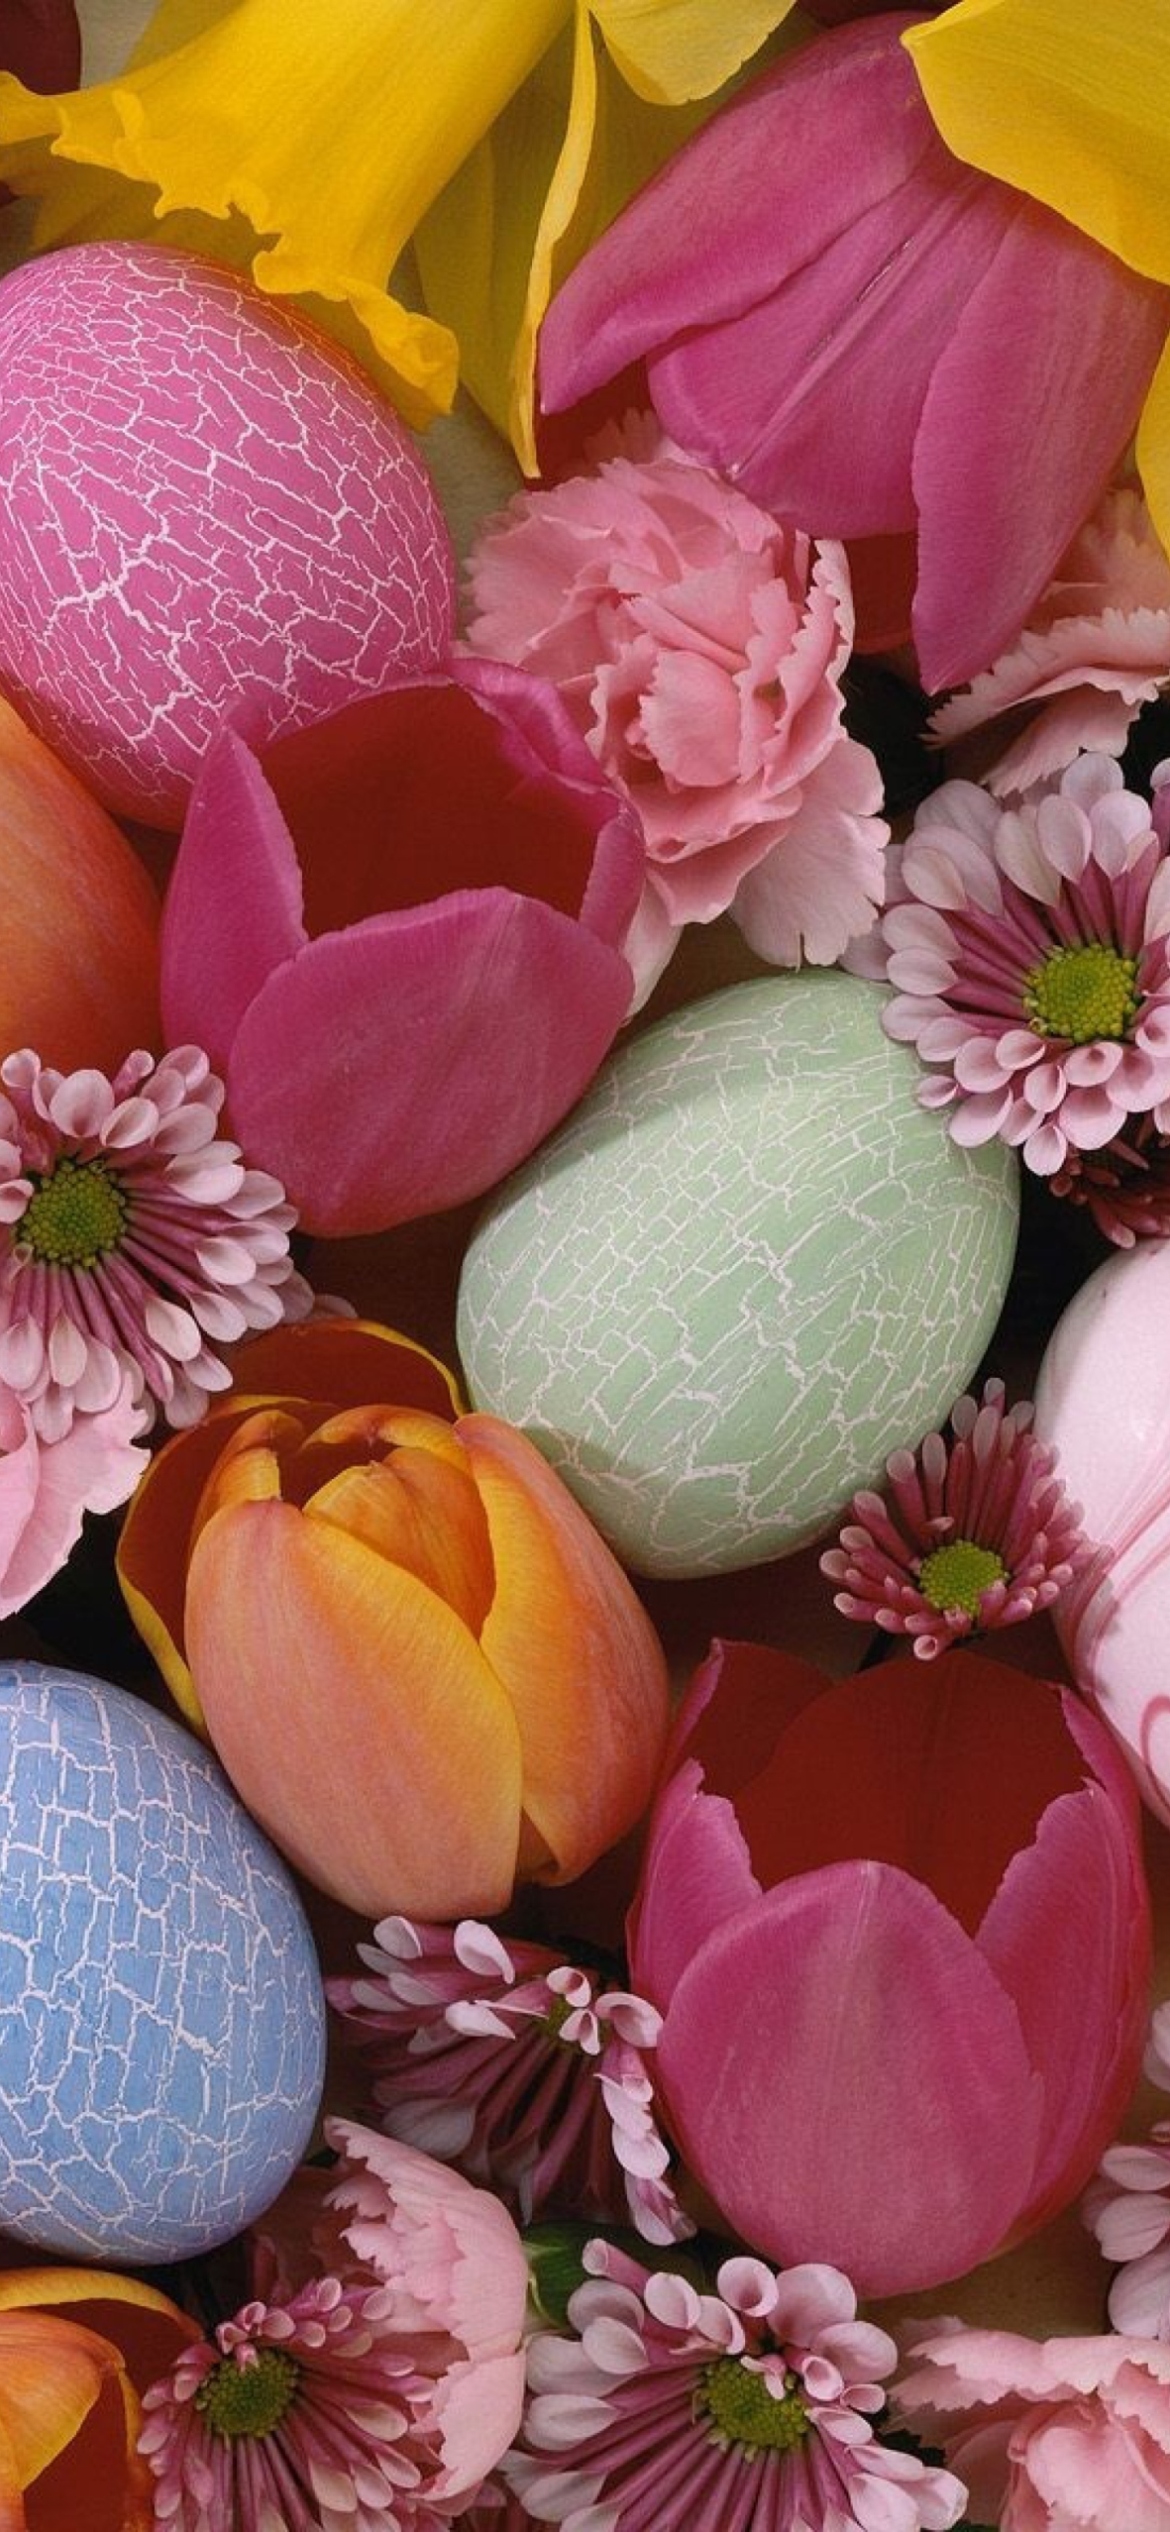 Das Easter Eggs And Flowers Wallpaper 1170x2532